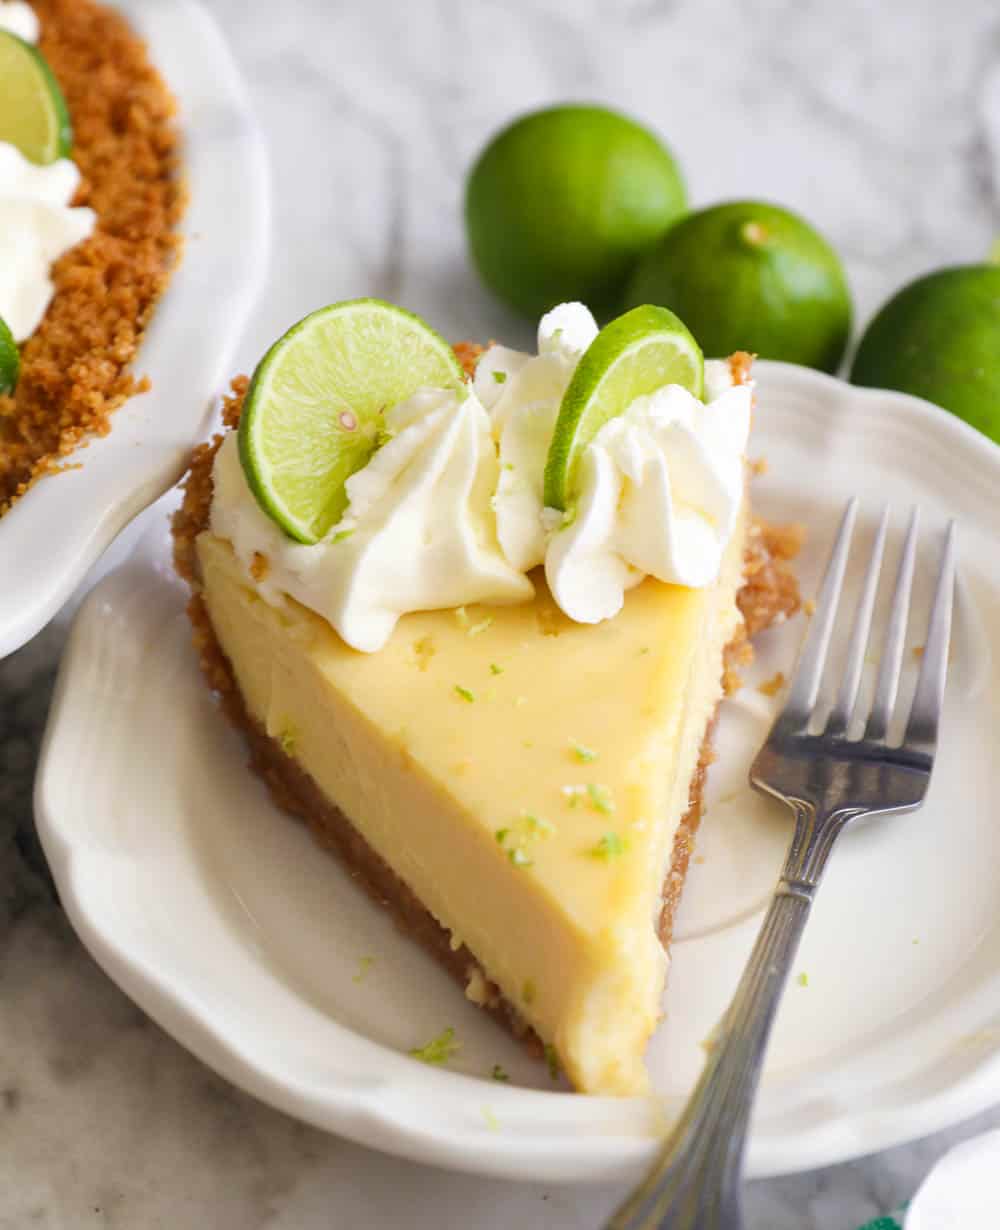 A serving of key lime pie with a fork